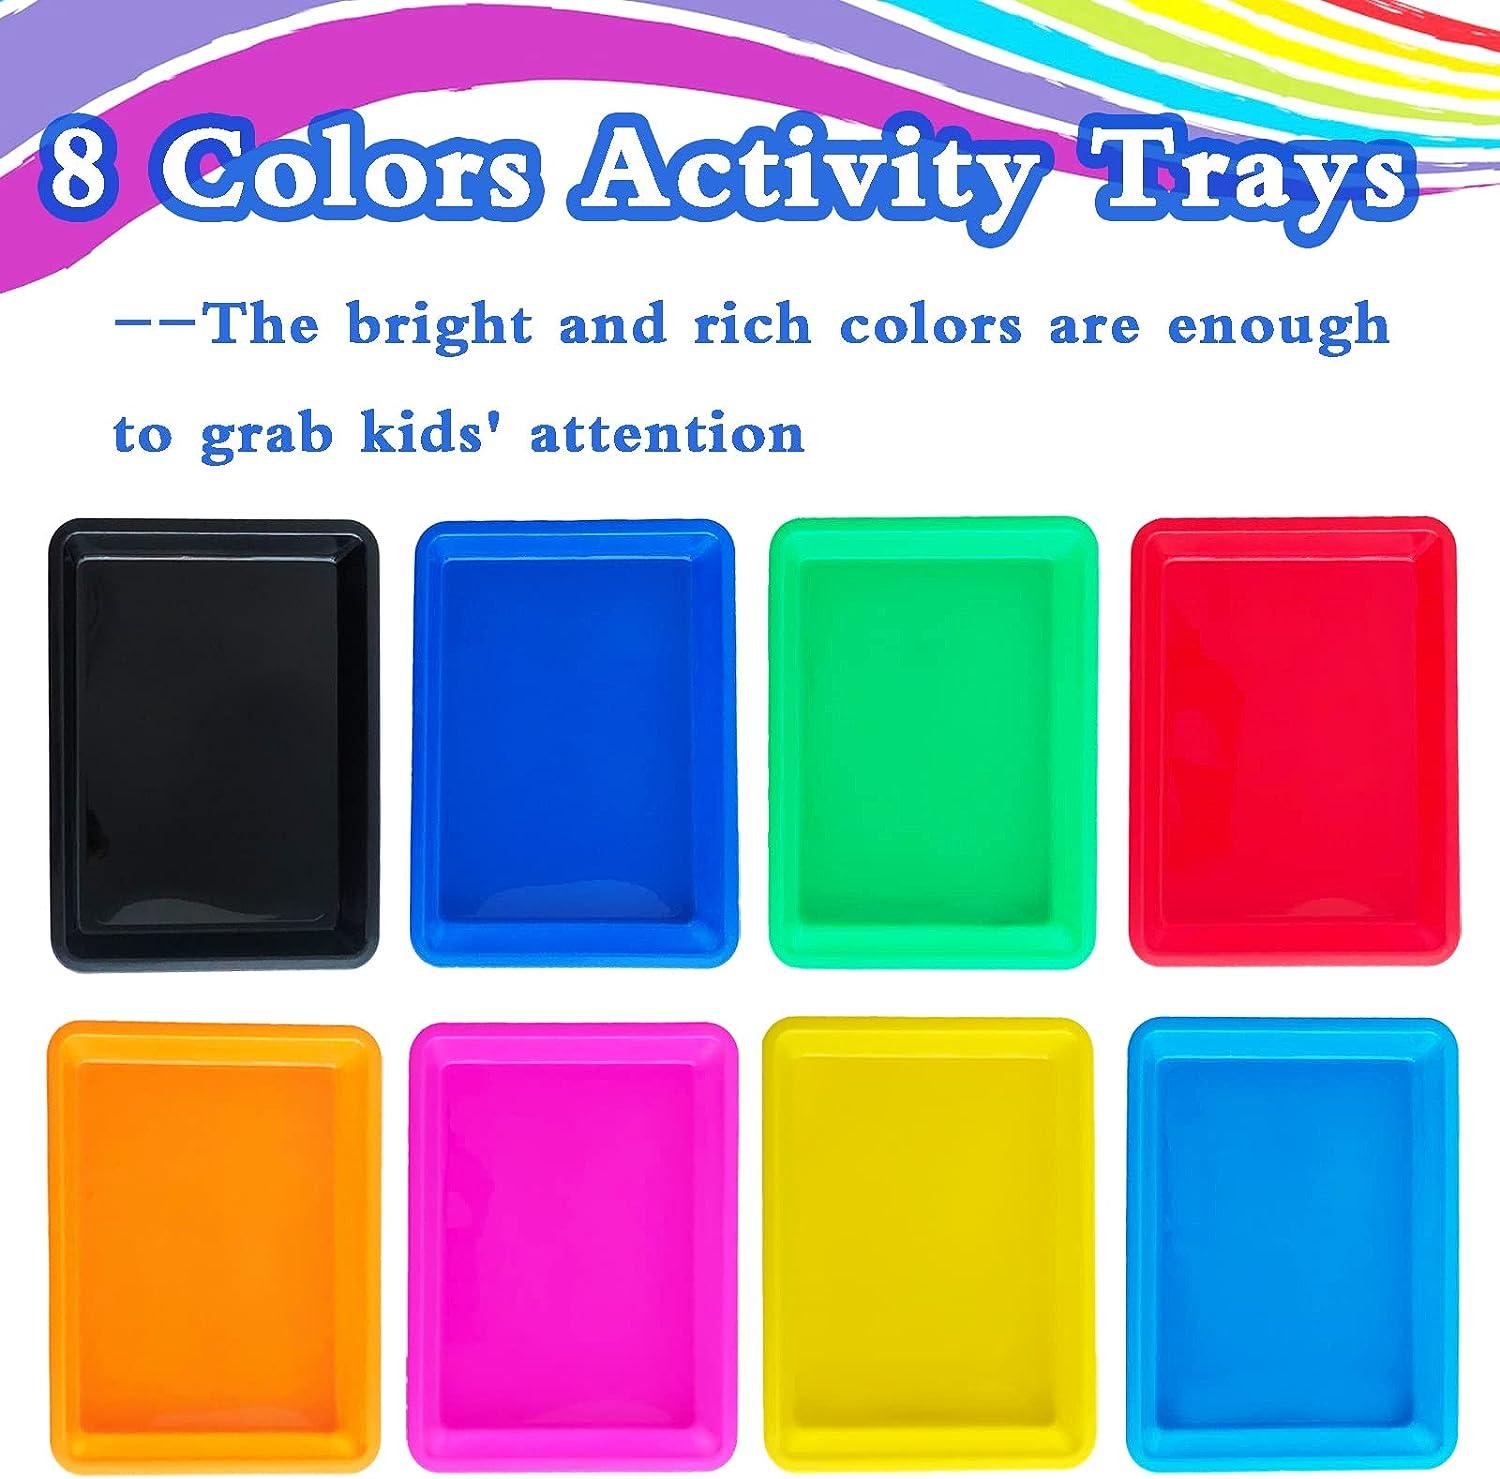 5 Pack Plastic Art Trays,5 Colors Activity Trays Sensory Tray,Art Trays for  Kids,Crafts Organizer,DIY Projects,Painting,Beads,Home,School 